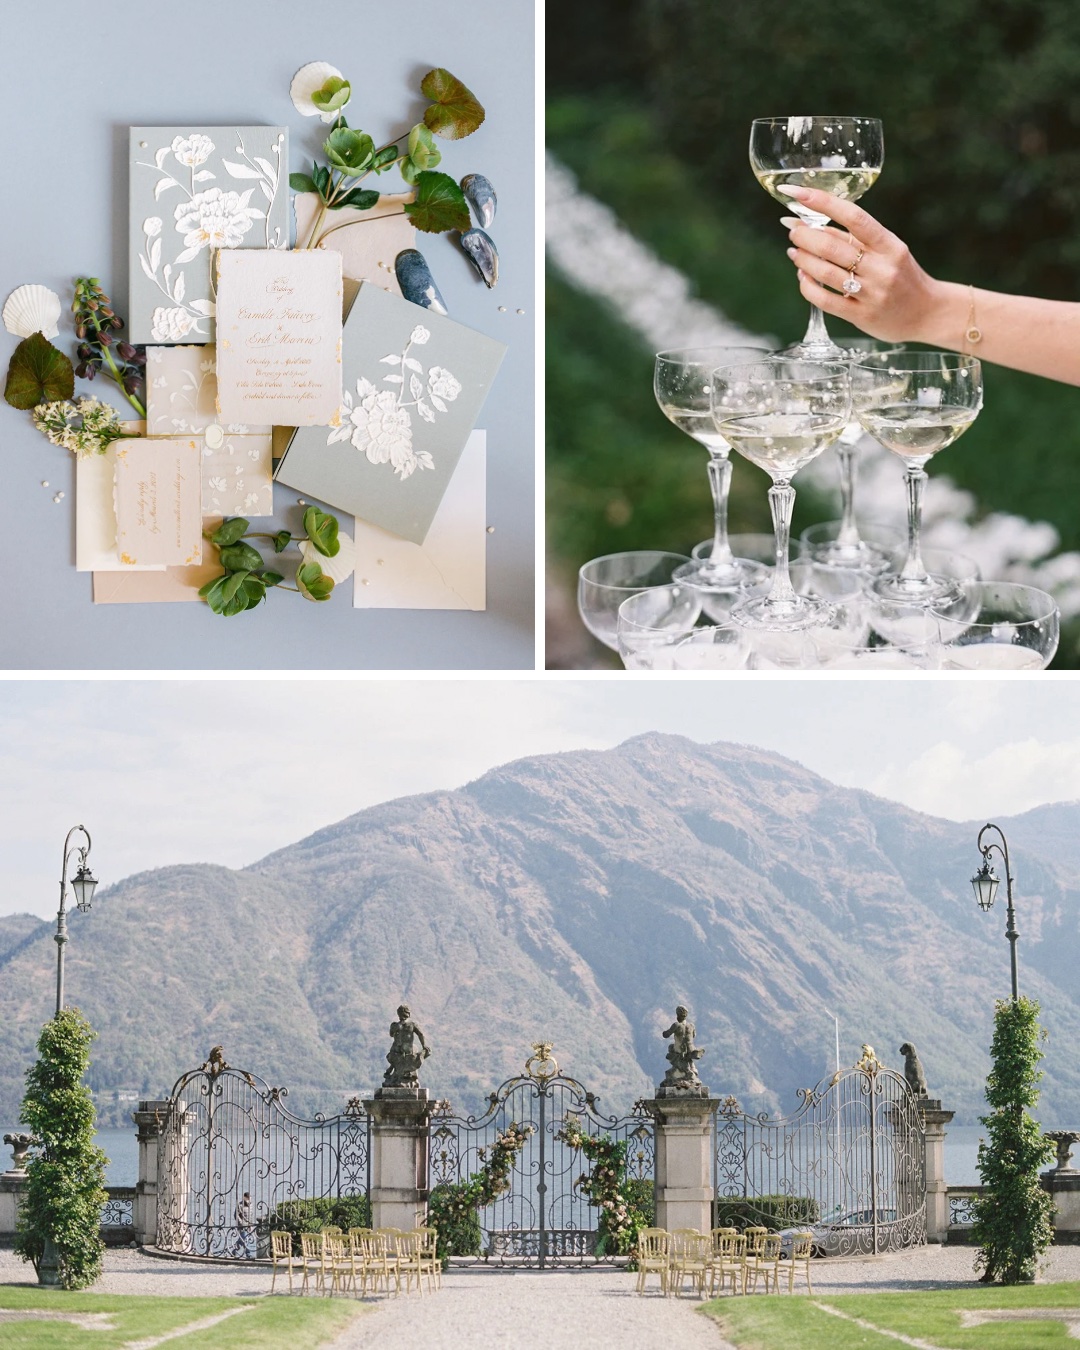 Collage of wedding invitations, champagne tower and scenic wedding venue